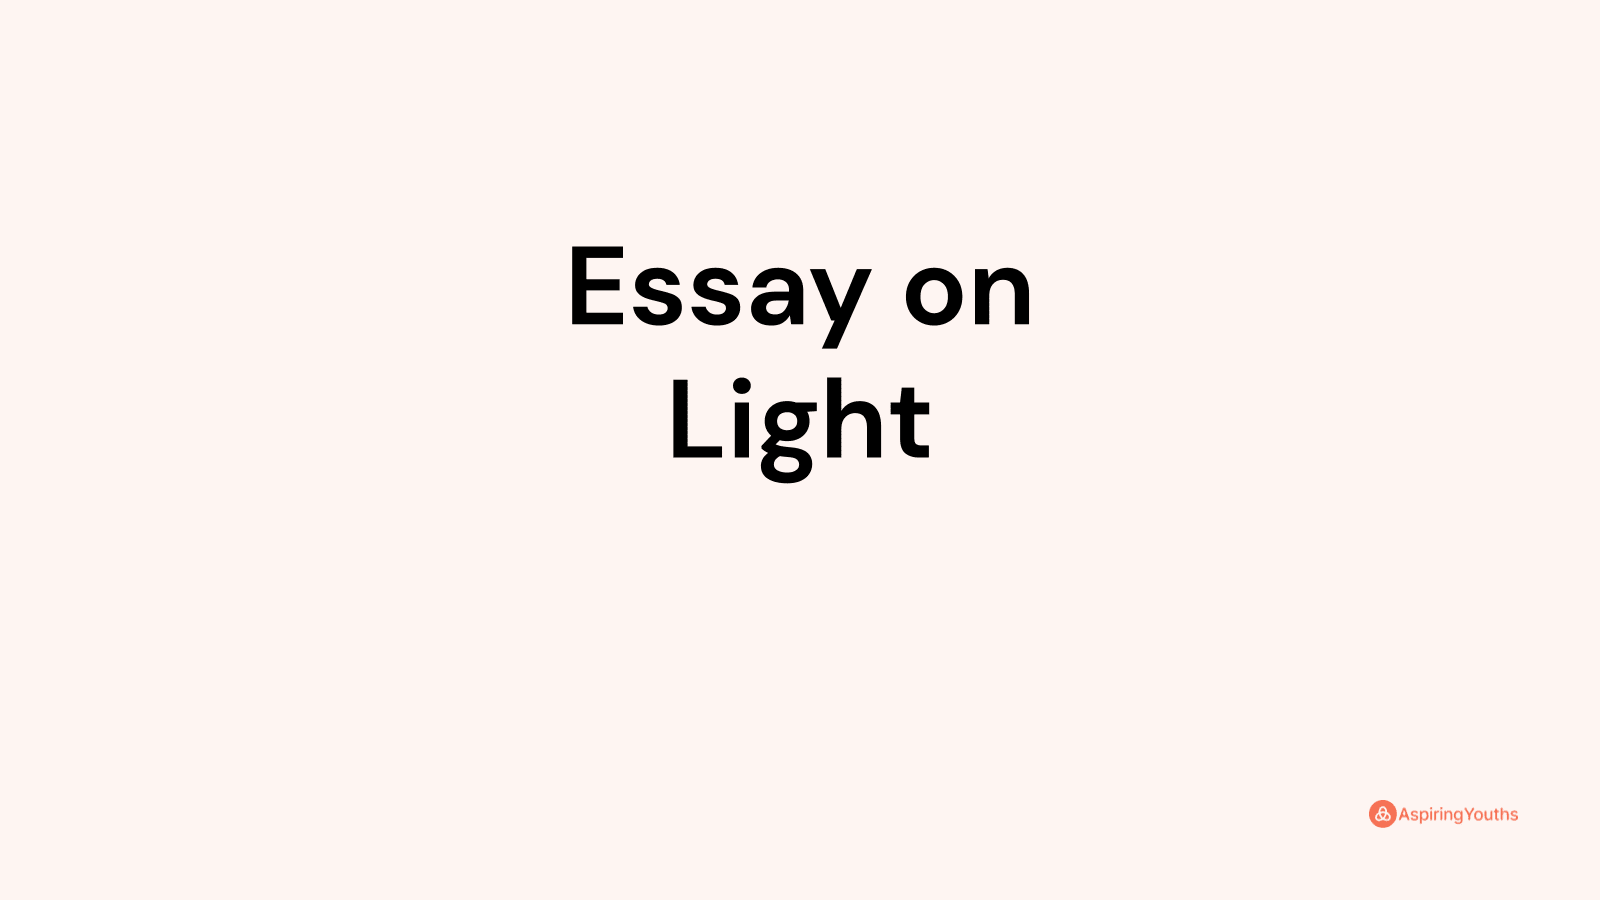 type of essay that is light and entertaining